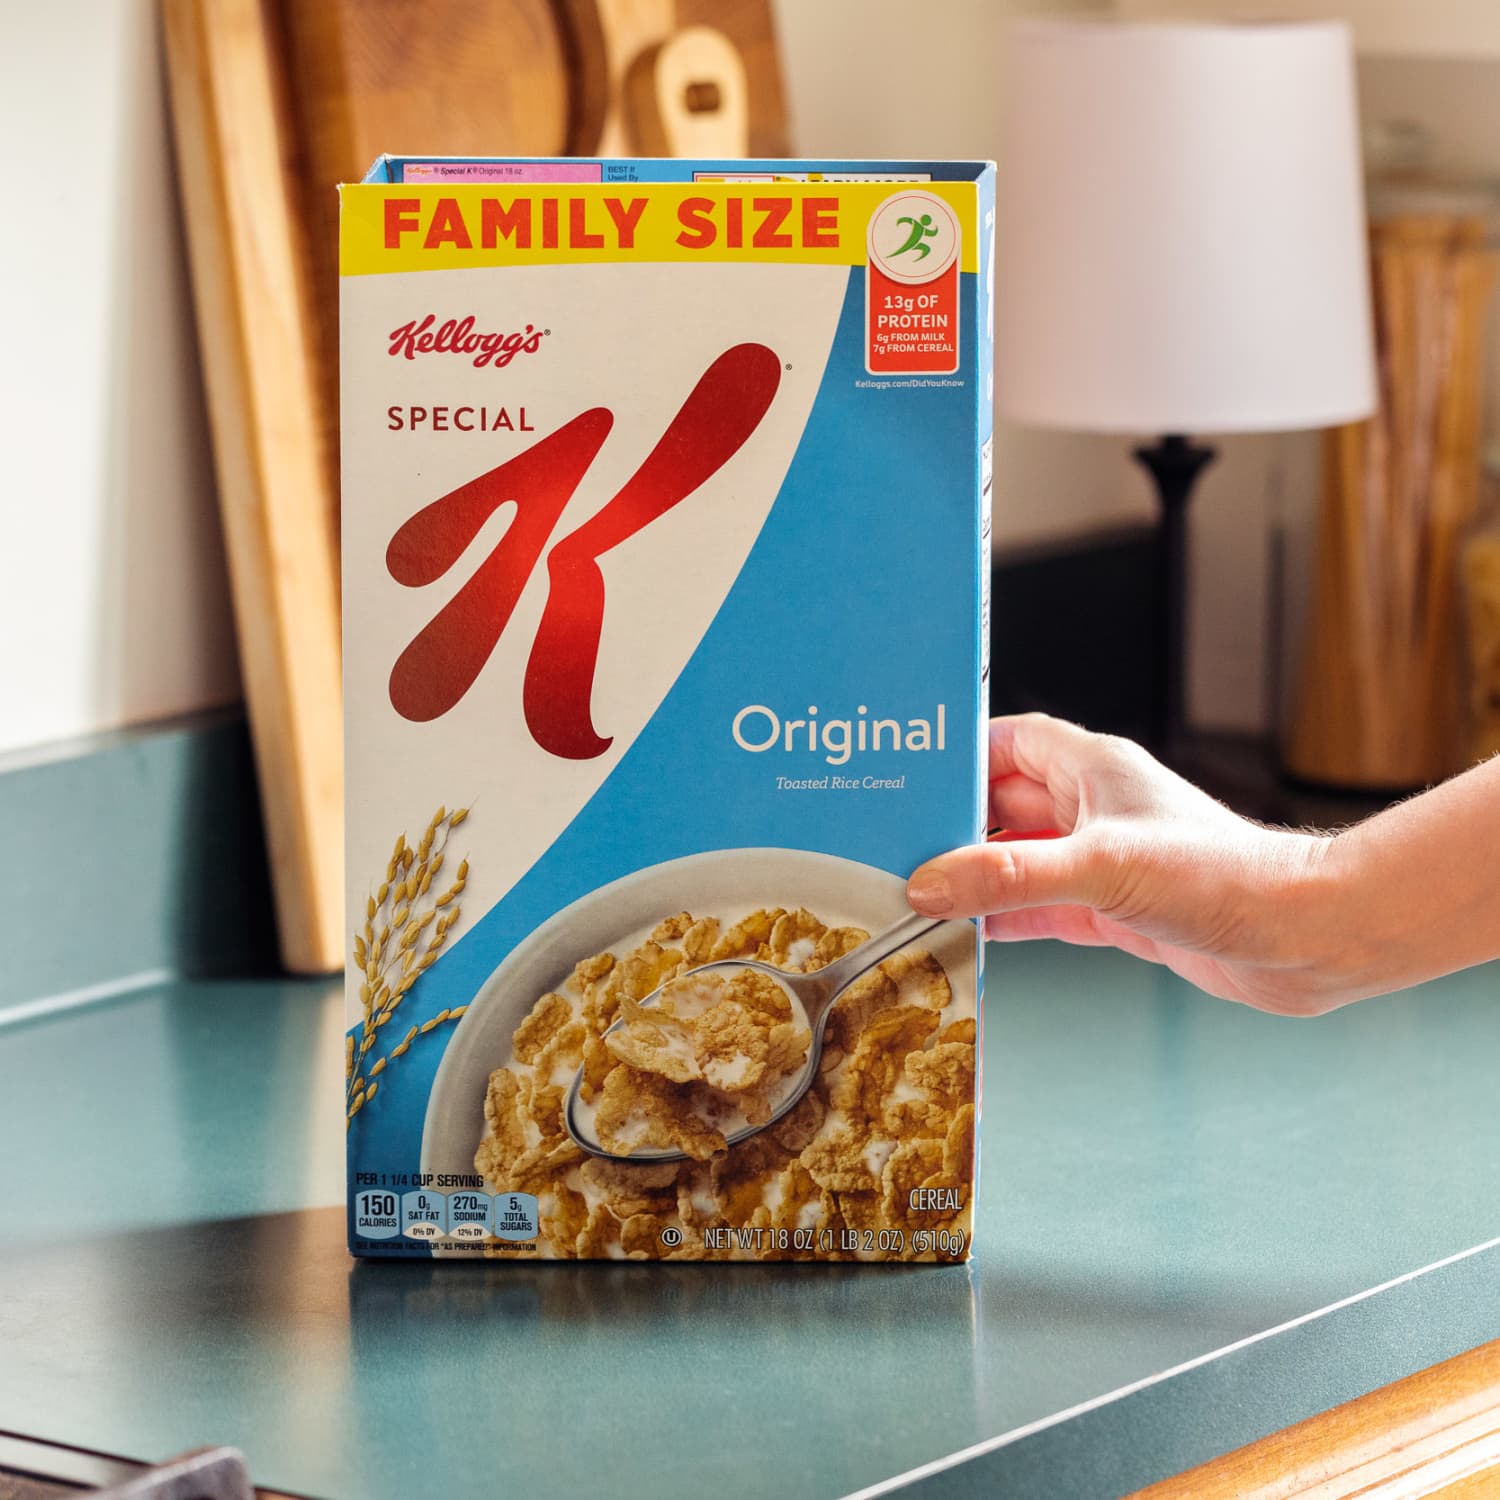 16+ Pictures Of Cereal Boxes